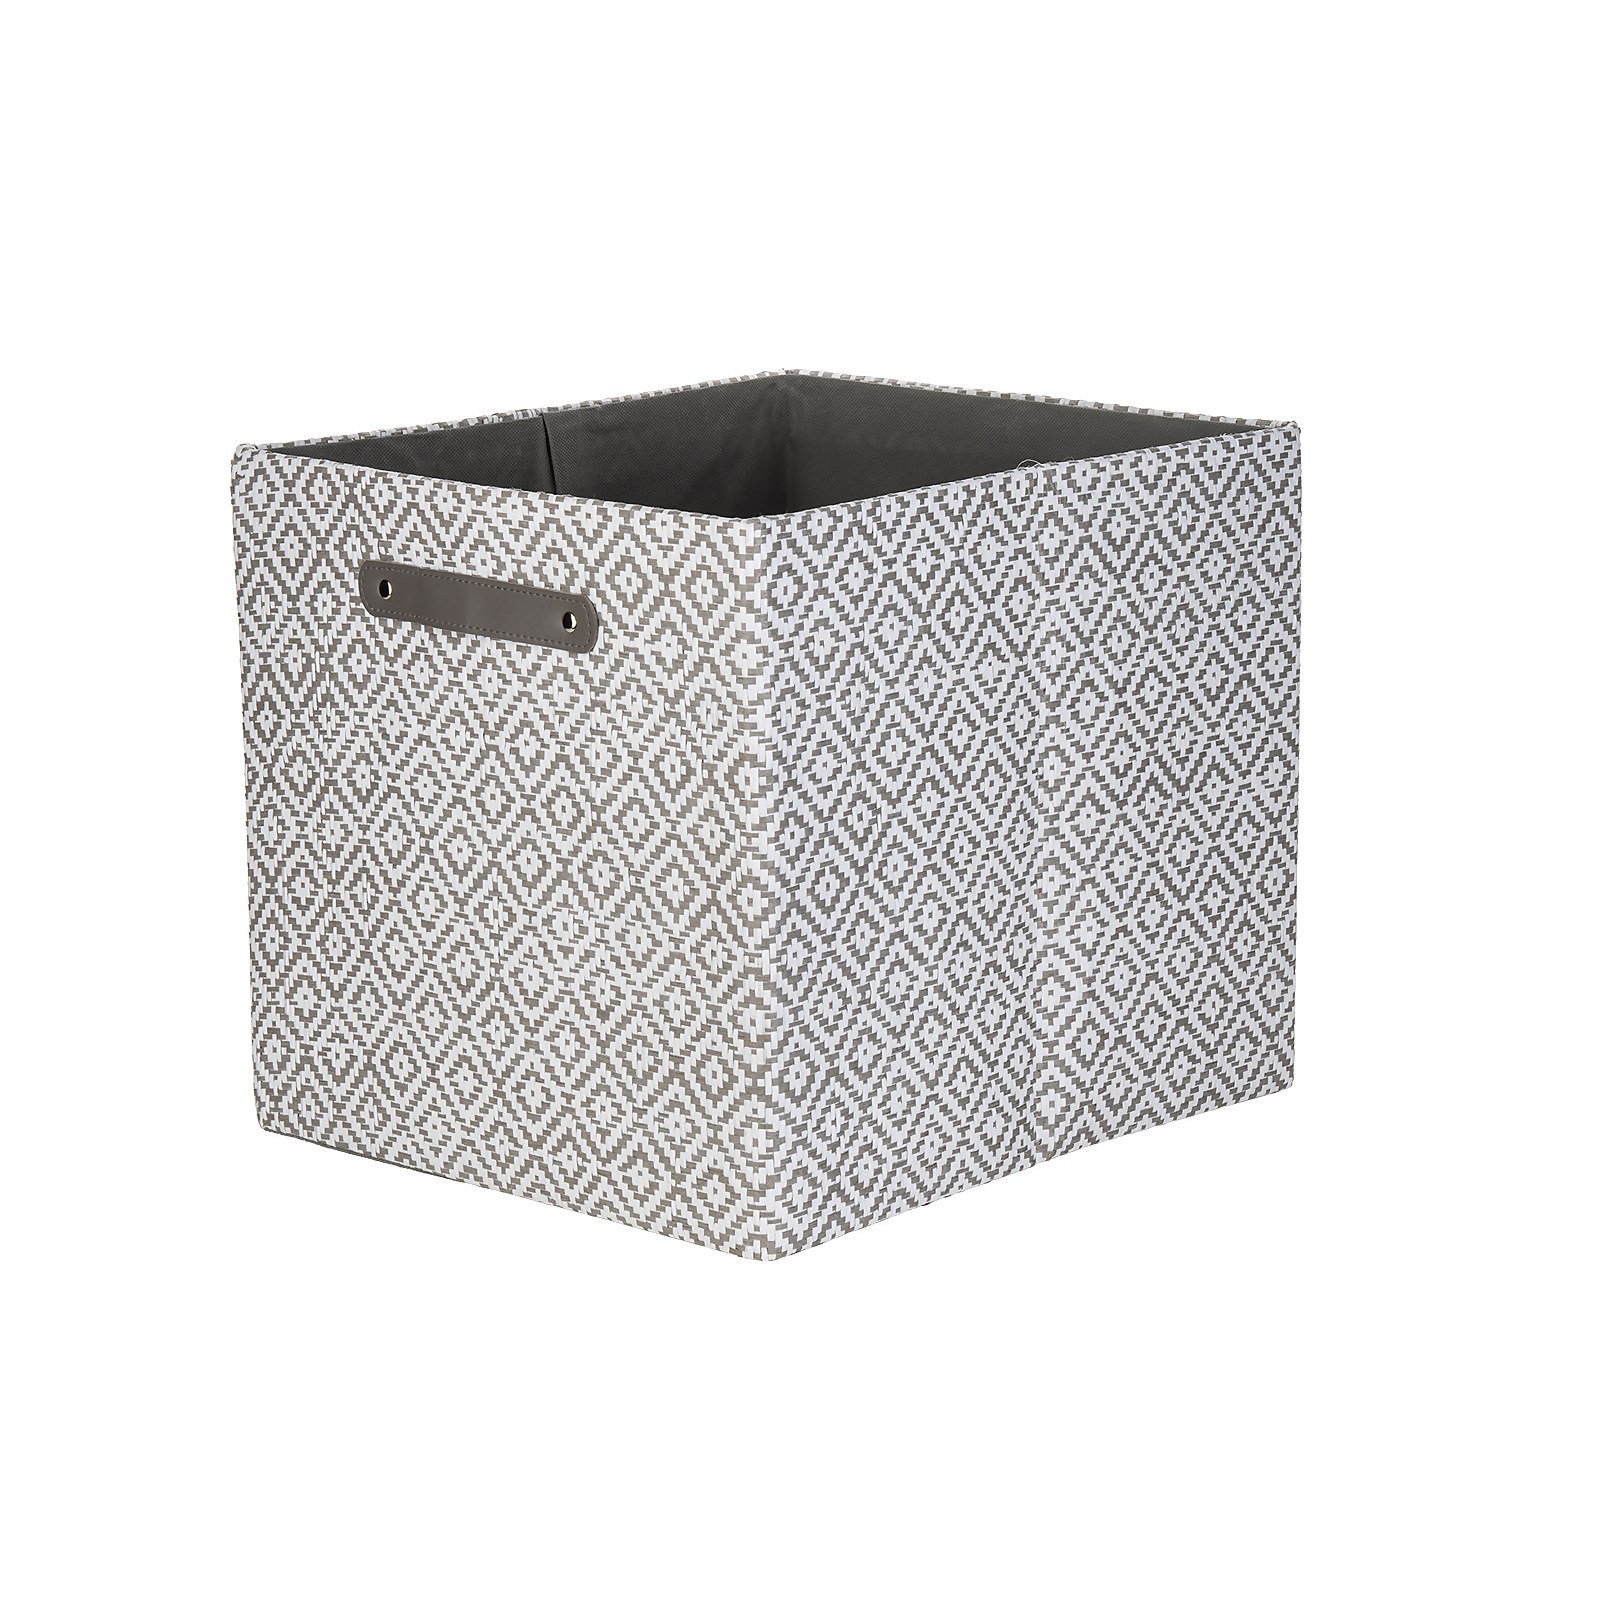 Photo of Living Elements Clever Cube Patterned Fabric Insert - Grey Jacquard